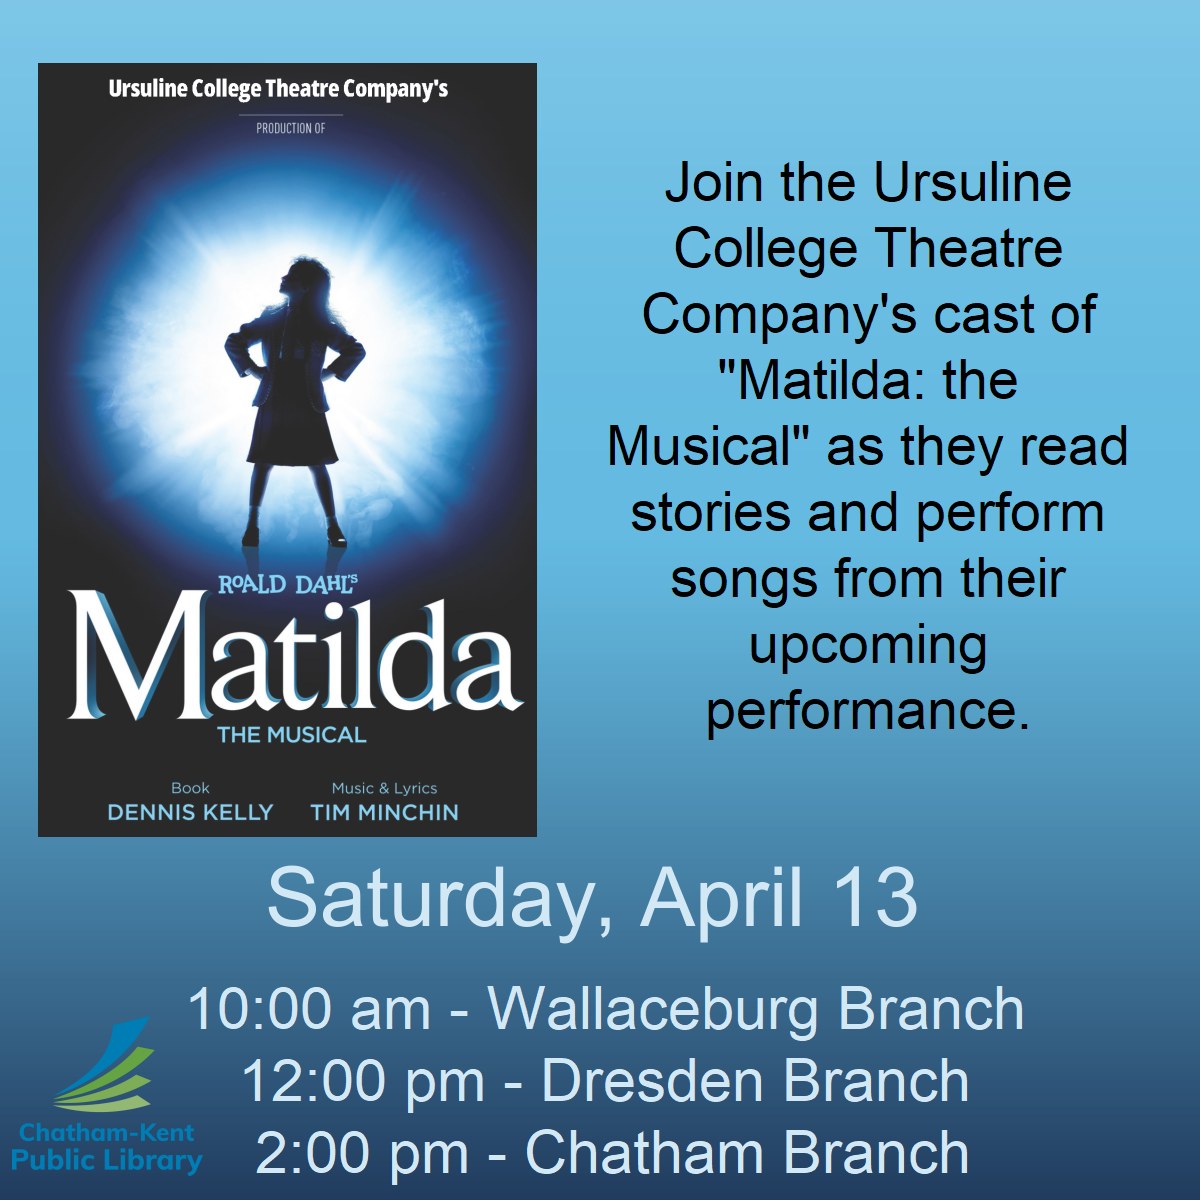 Matilda the Musical presented by Ursuline College Theatre Company is going on a library tour. Join them for songs and stories presented by Matilda and Miss Honey.
April 13th at:
Wallaceburg Branch at 10am
Dresden Branch at 12pm
Chatham Branch at 2pm
#YourTVCK #CKont #TrulyLocal